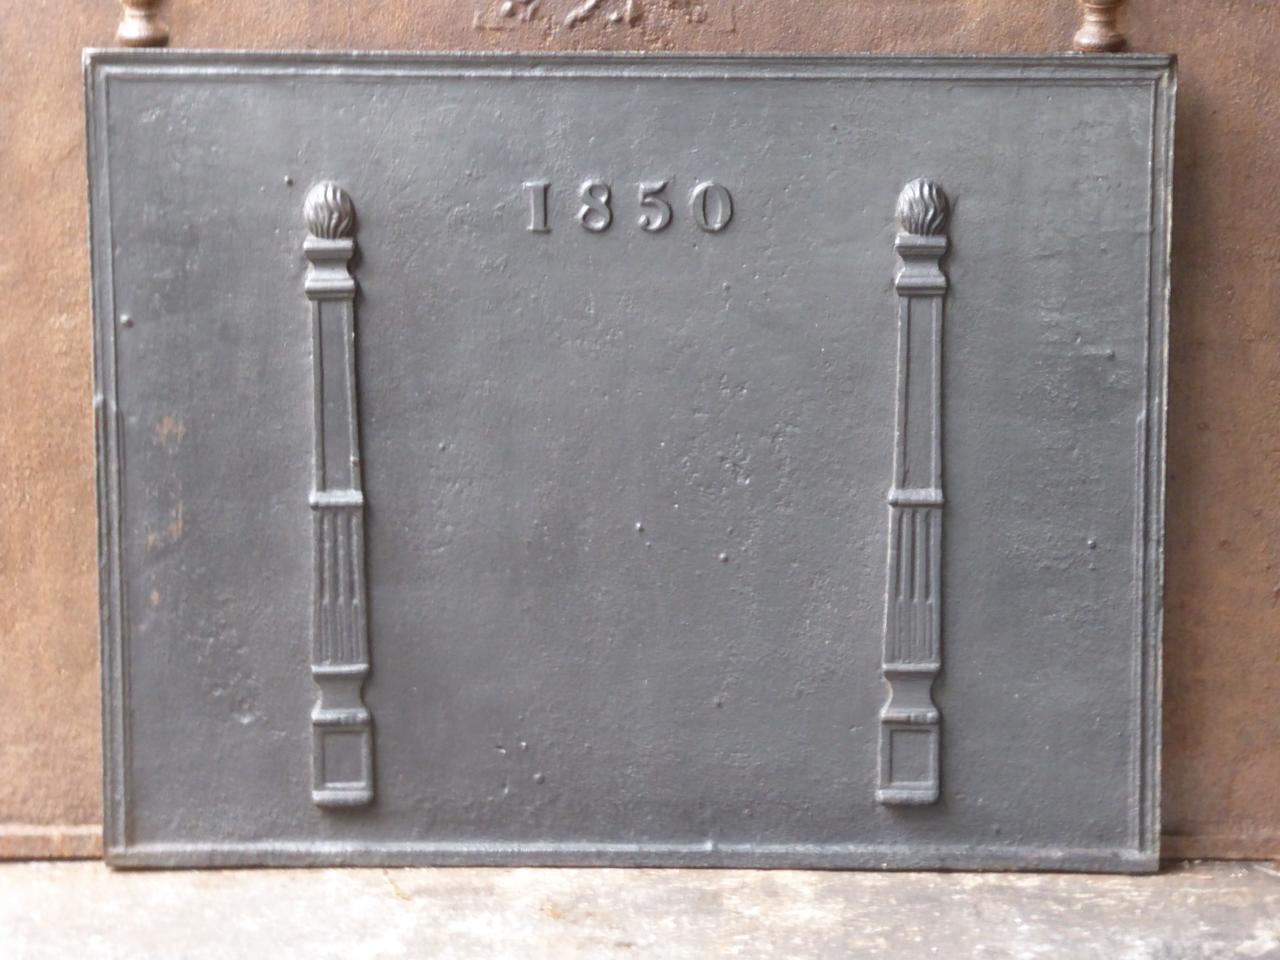 19th century French neoclassical fireback with two pillars of freedom. The pillars stand for the value liberty. This is one of the three values of the French revolution. The date of production, 1850, is also cast in the fireback. The fireback is